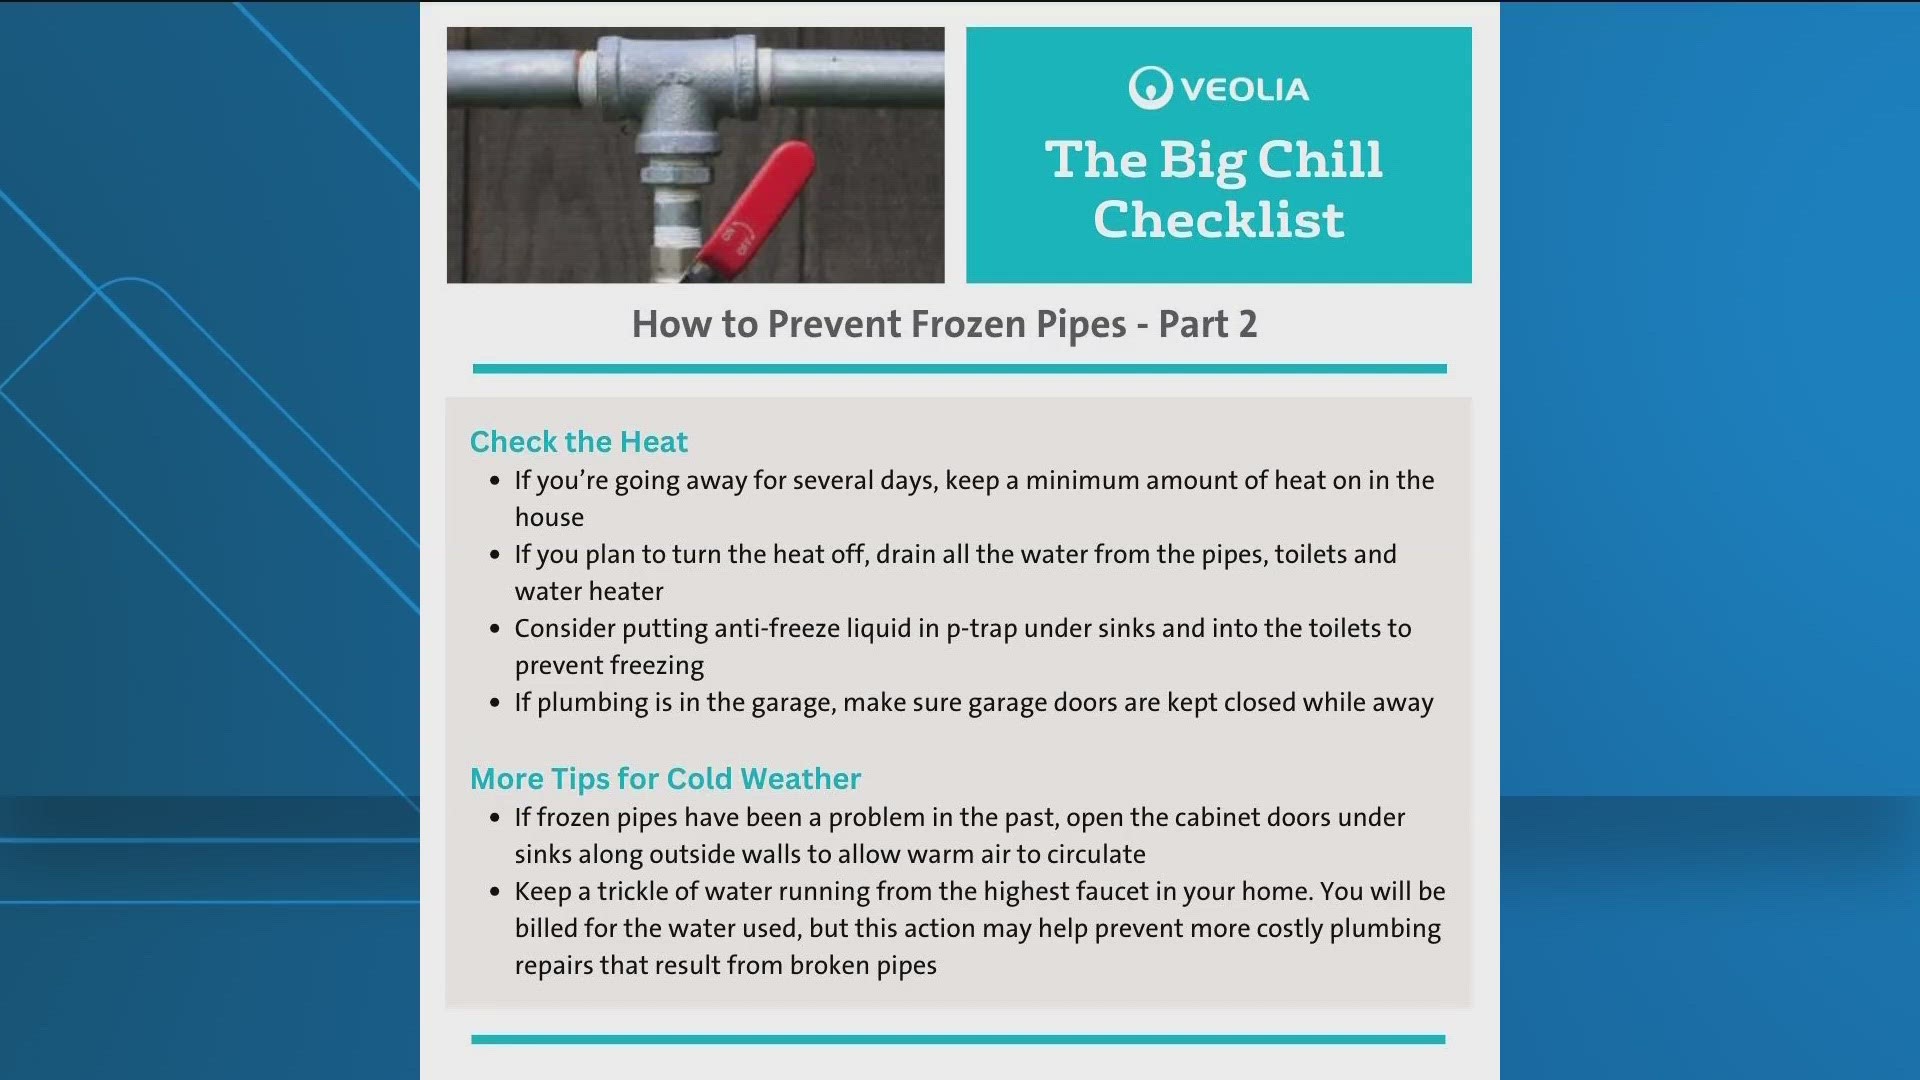 How to Prevent, Treat Frozen Pipes